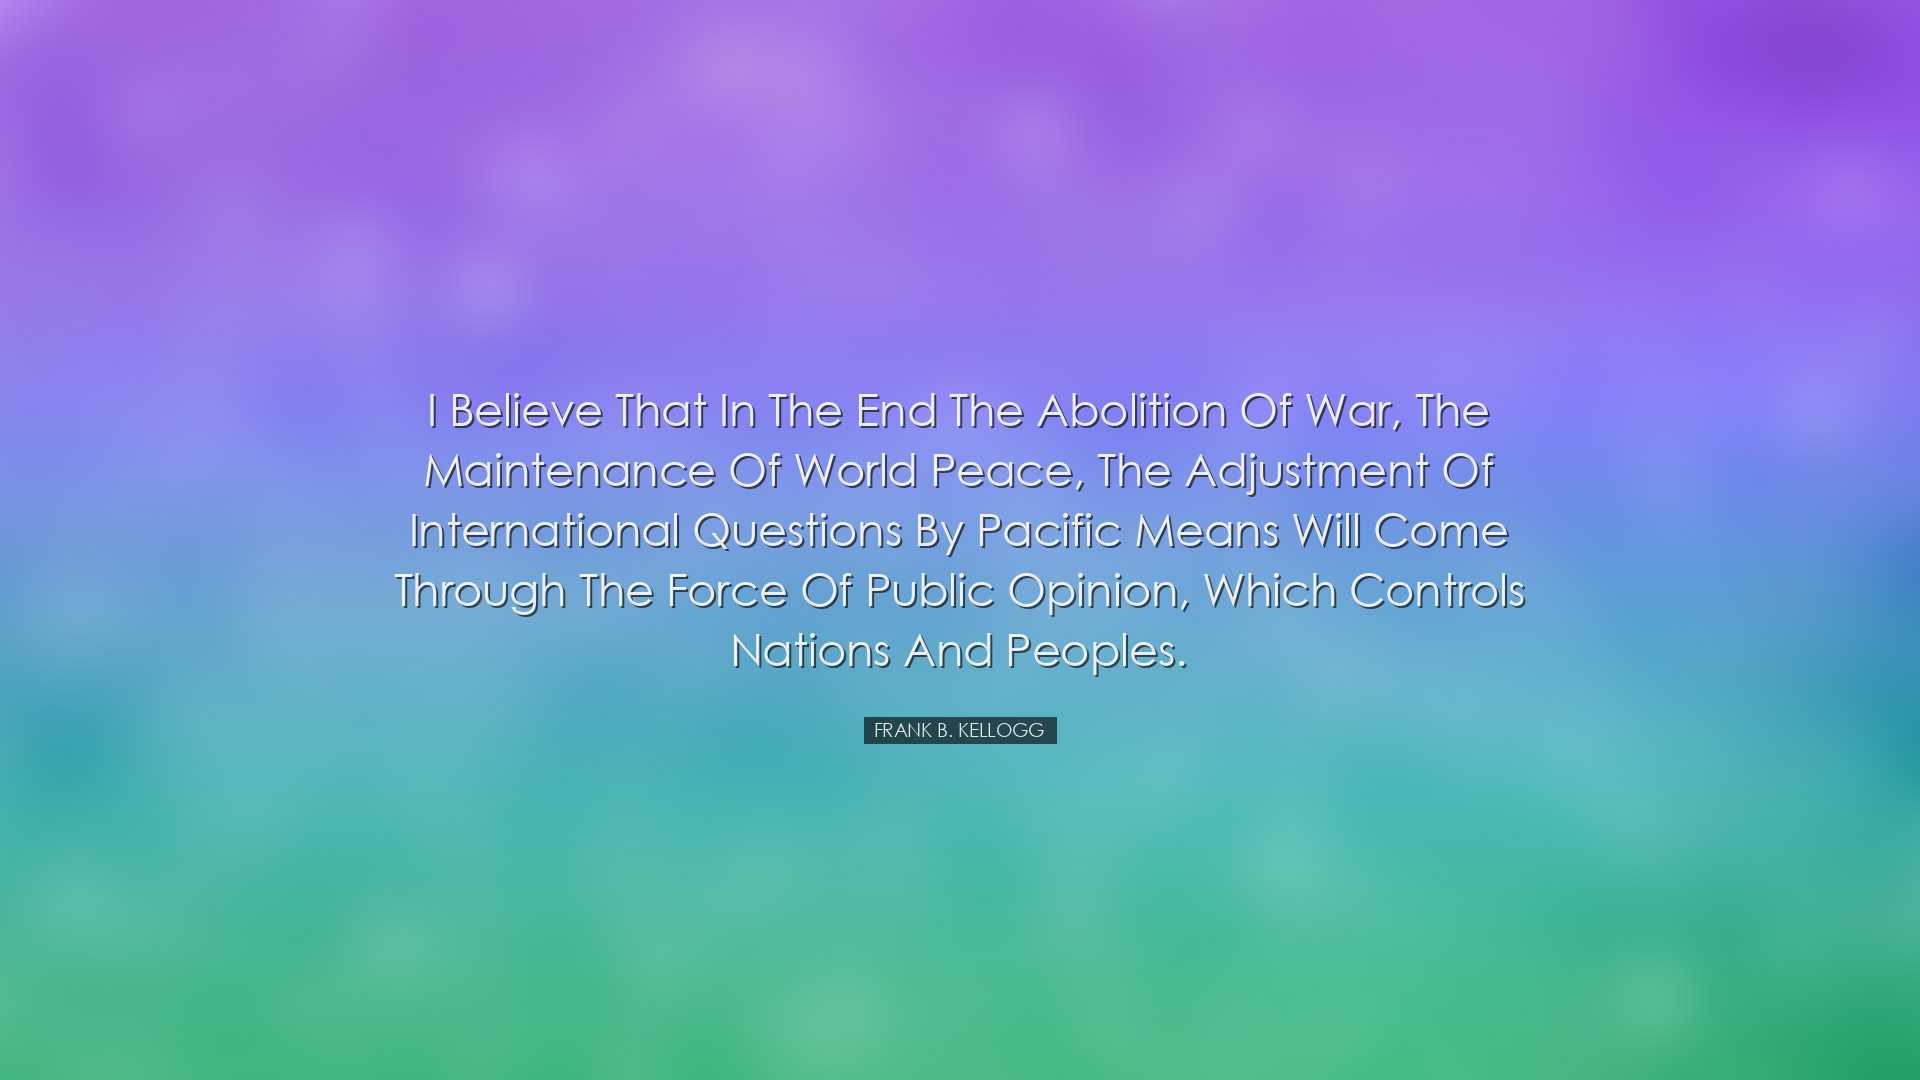 I believe that in the end the abolition of war, the maintenance of